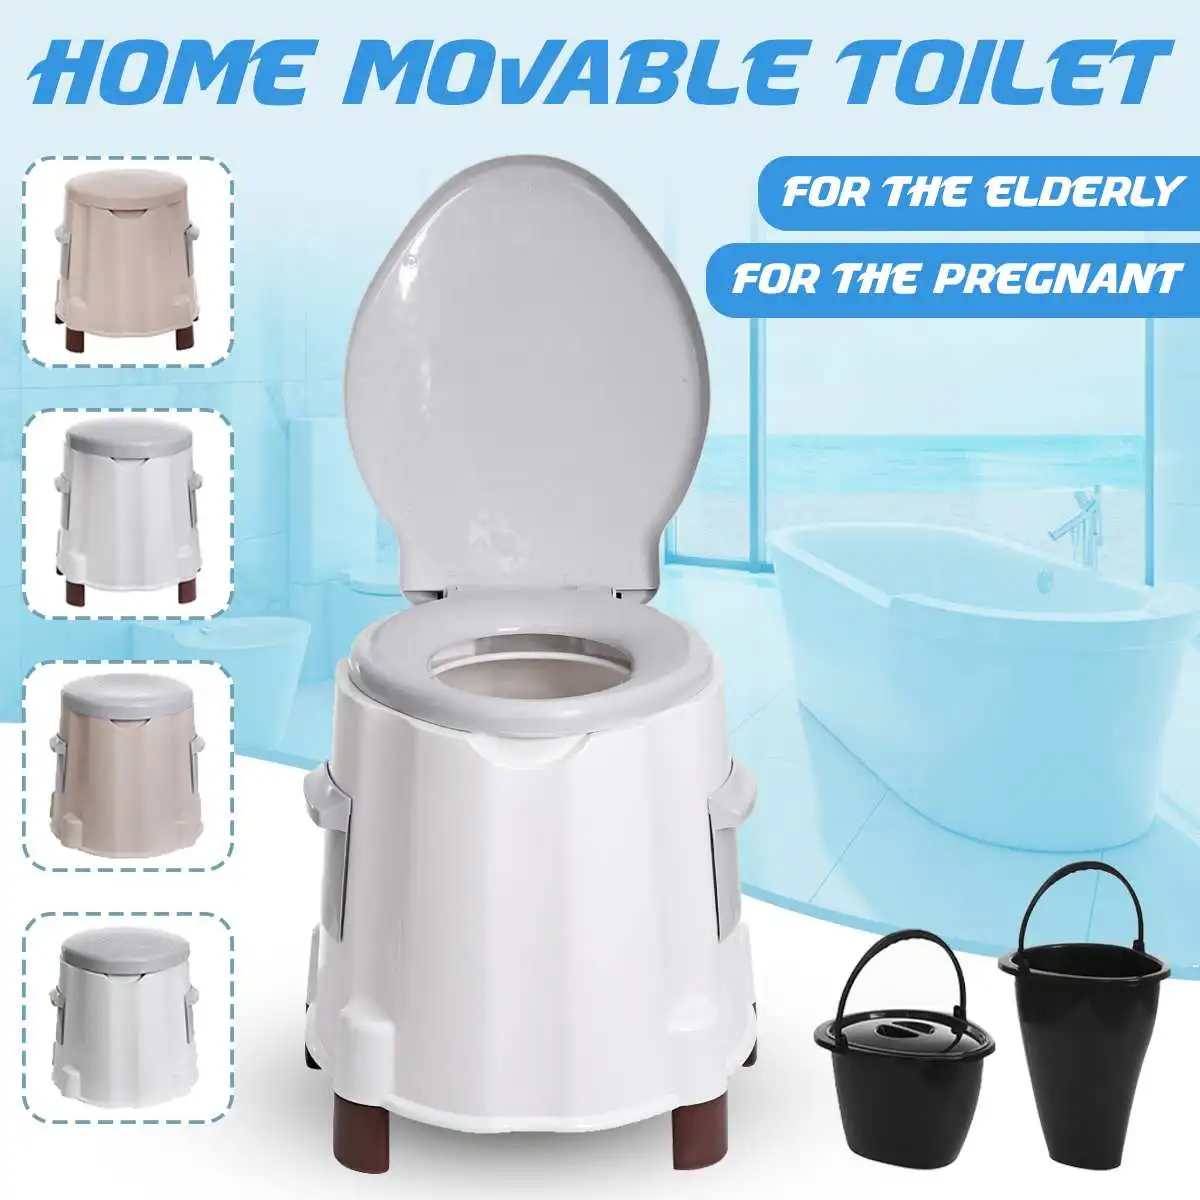 

Portable Toilet Seat Old Elderly Pregnant Woman Home Bathroom Indoor Removable Potty Commode Toilets Spittoon Seat 40cm 47cm